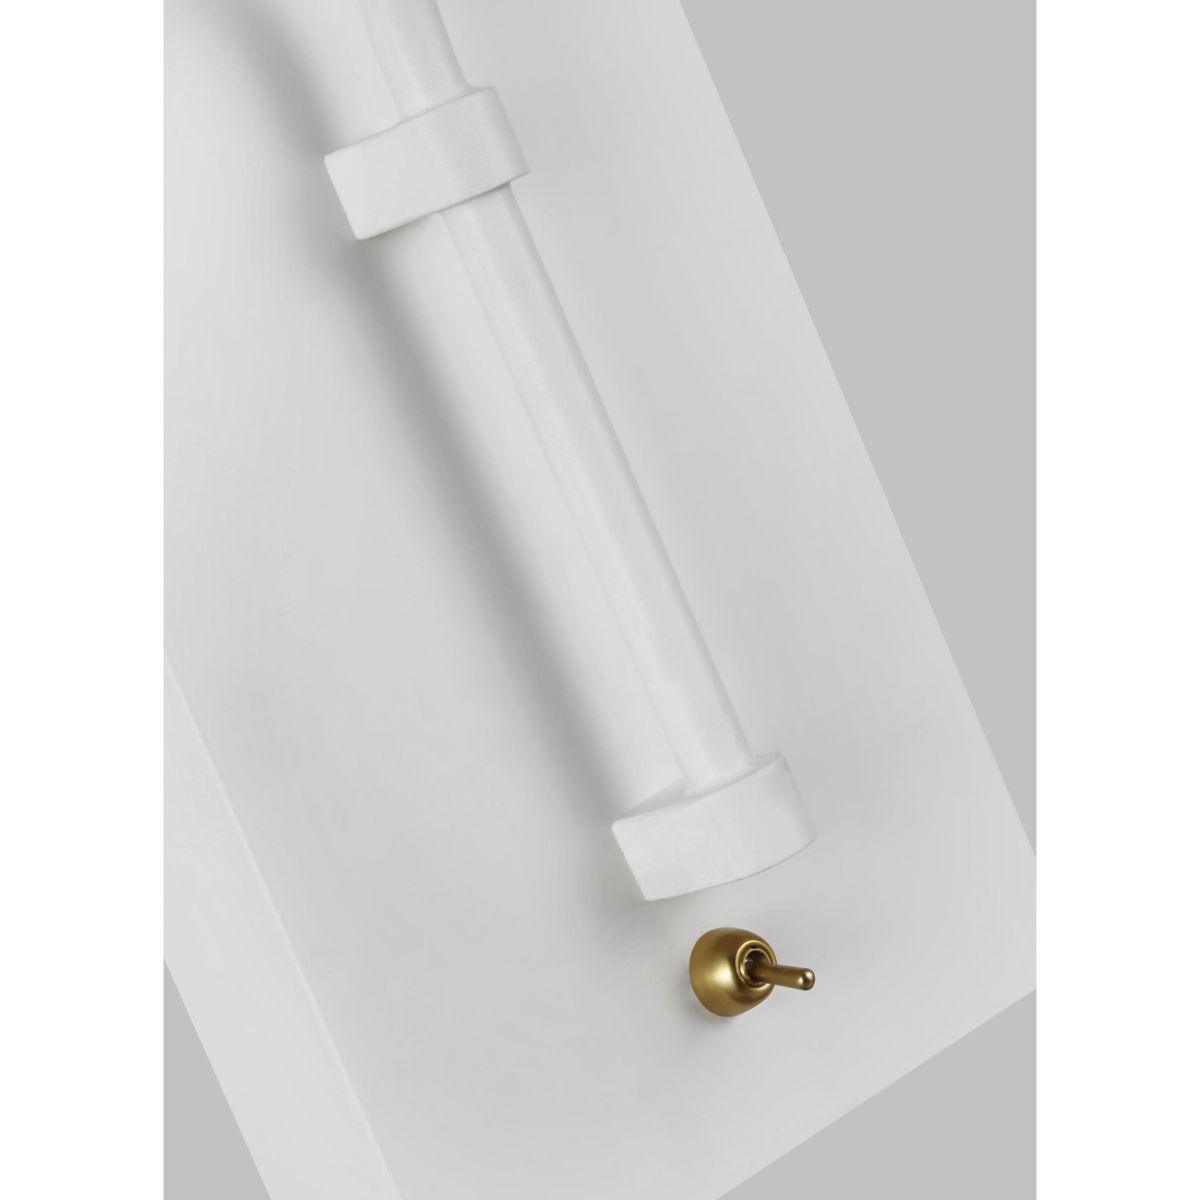 Simon 24 in. Armed Sconce